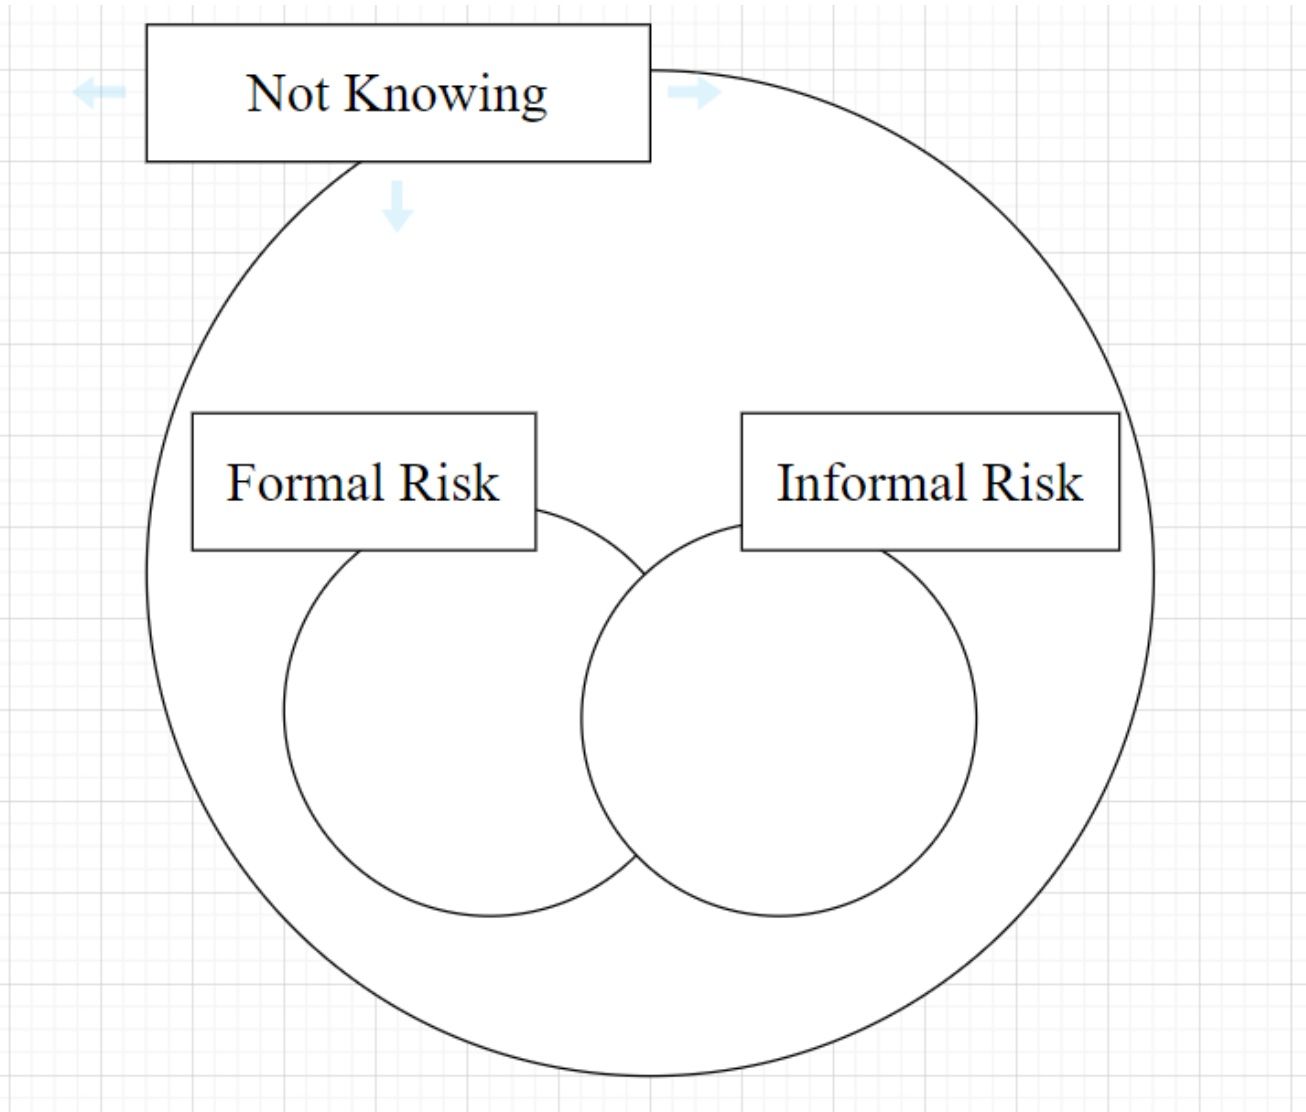 One participant’s diagram showing formal and informal risk in relation to not-knowing.